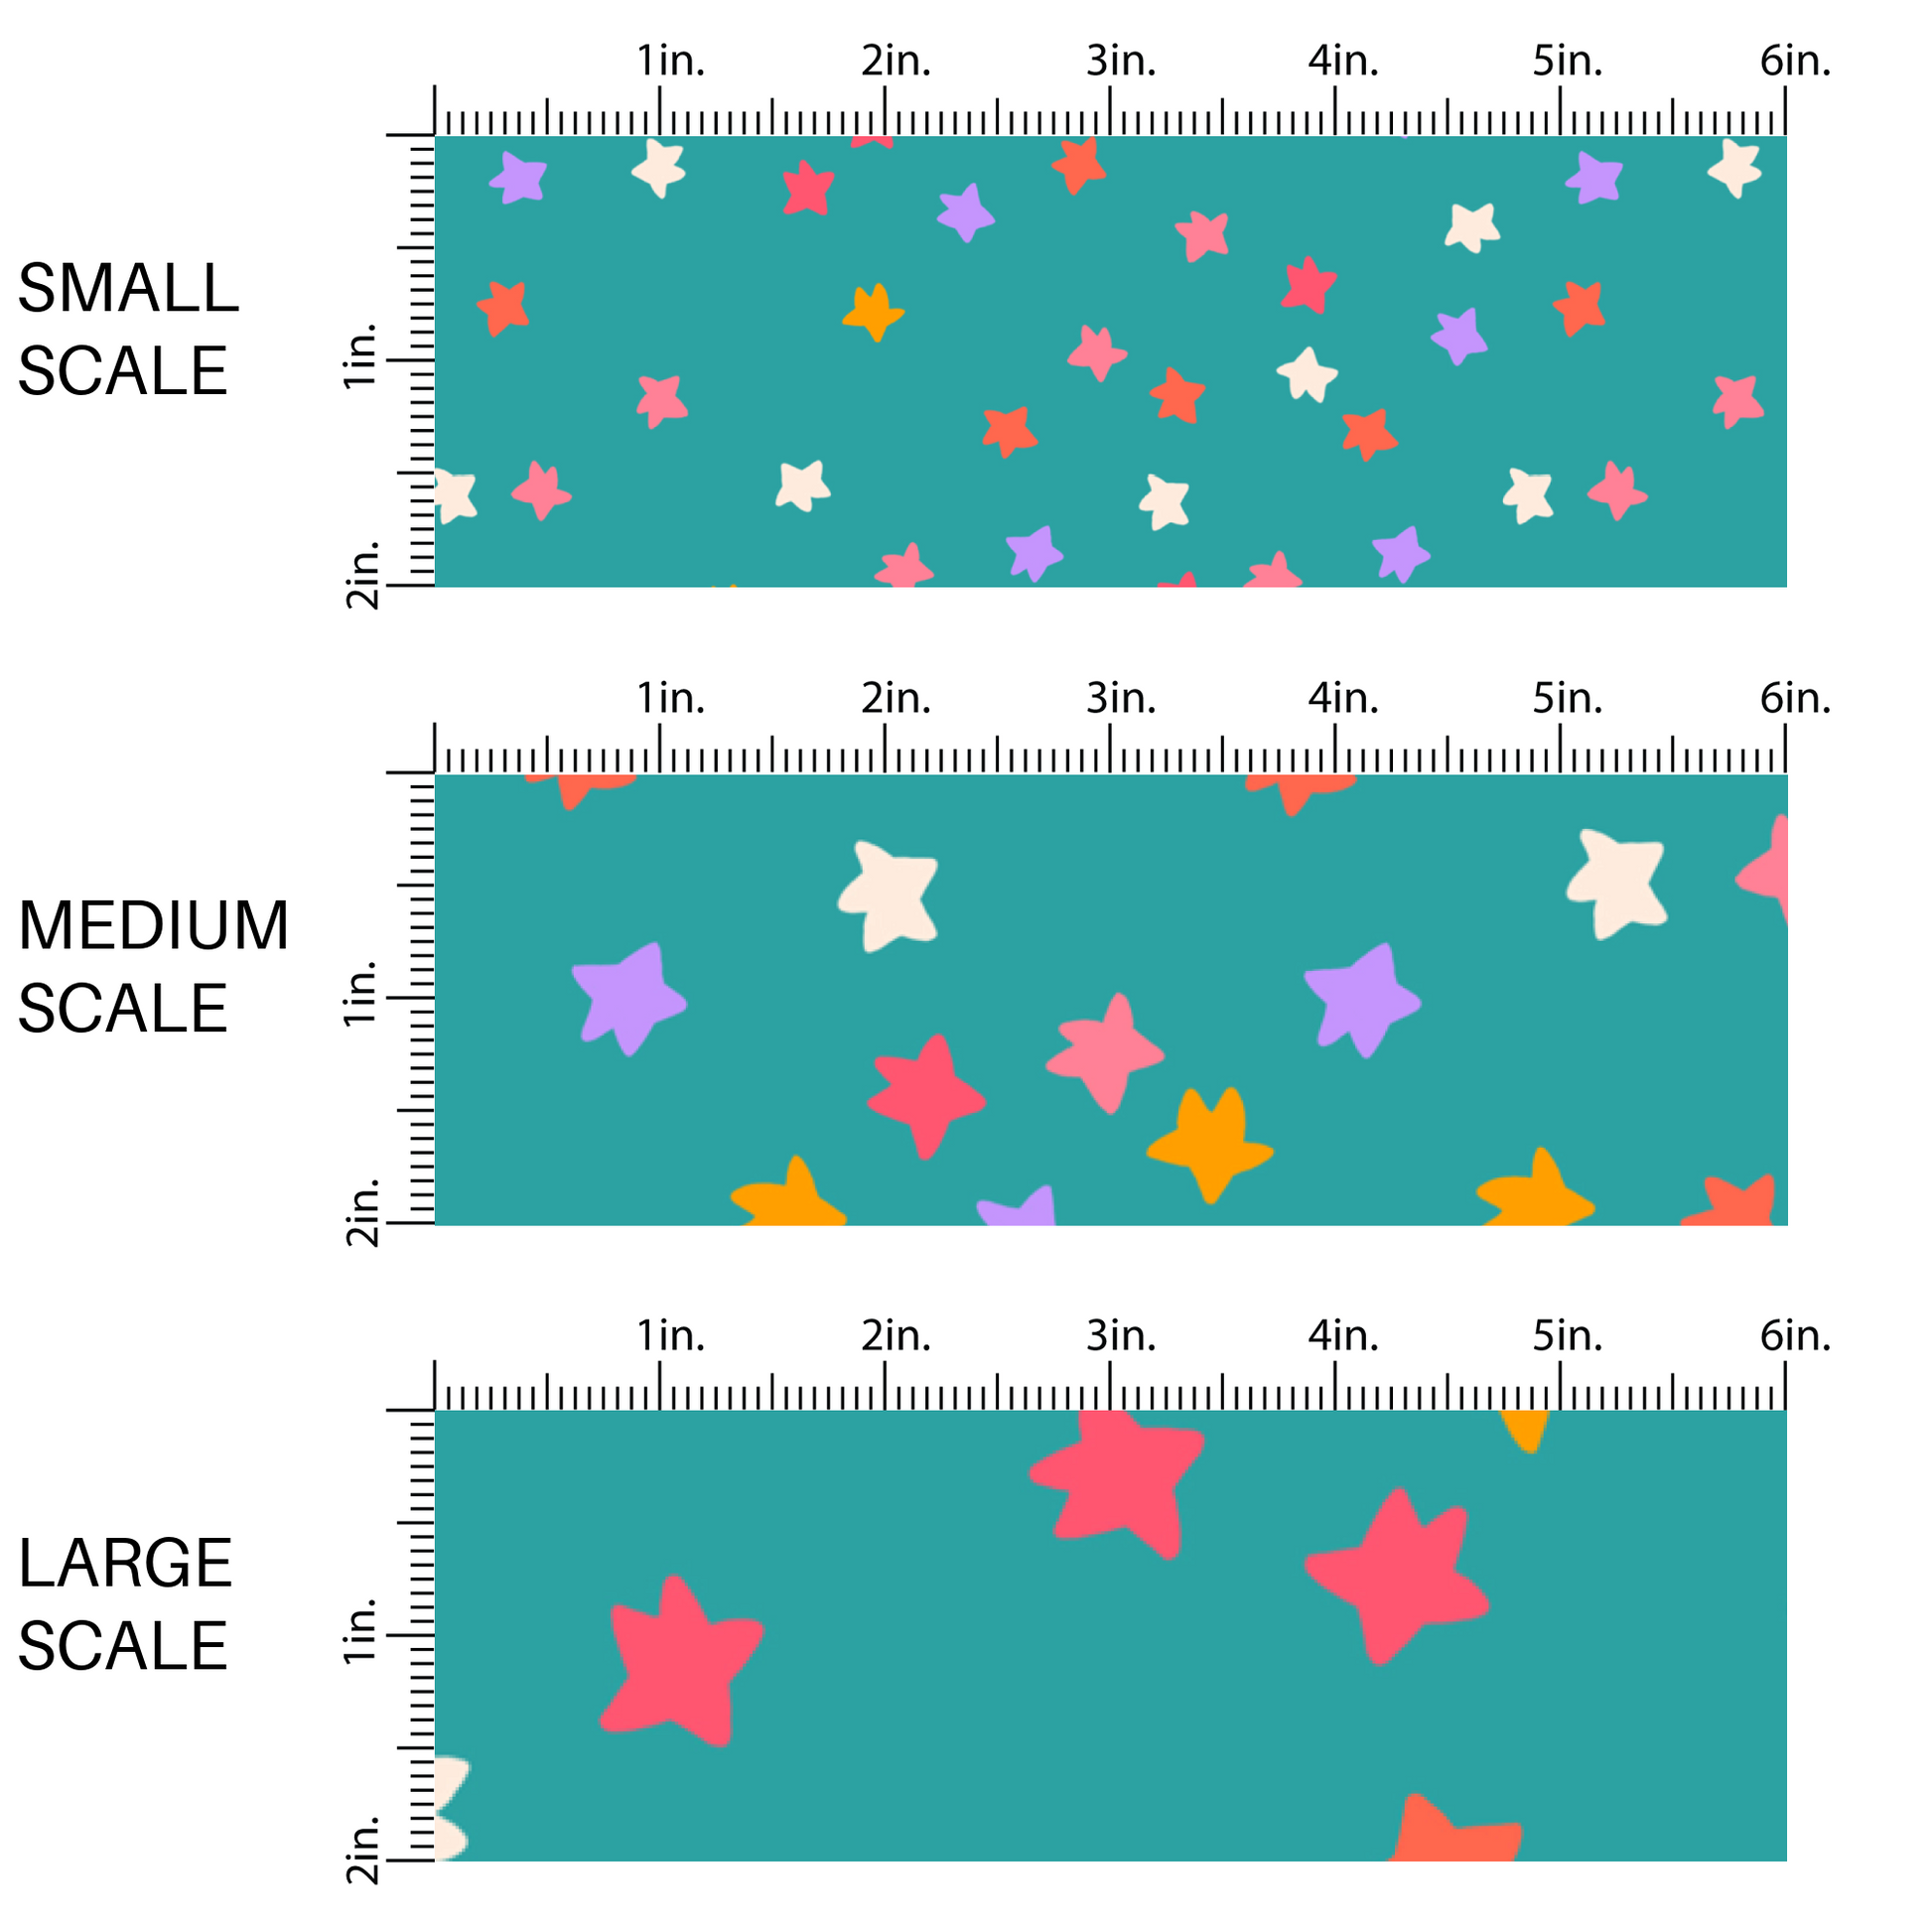 Teal fabric by the yard scaled image guide with white, pink, yellow, pink, and purple scattered stars.